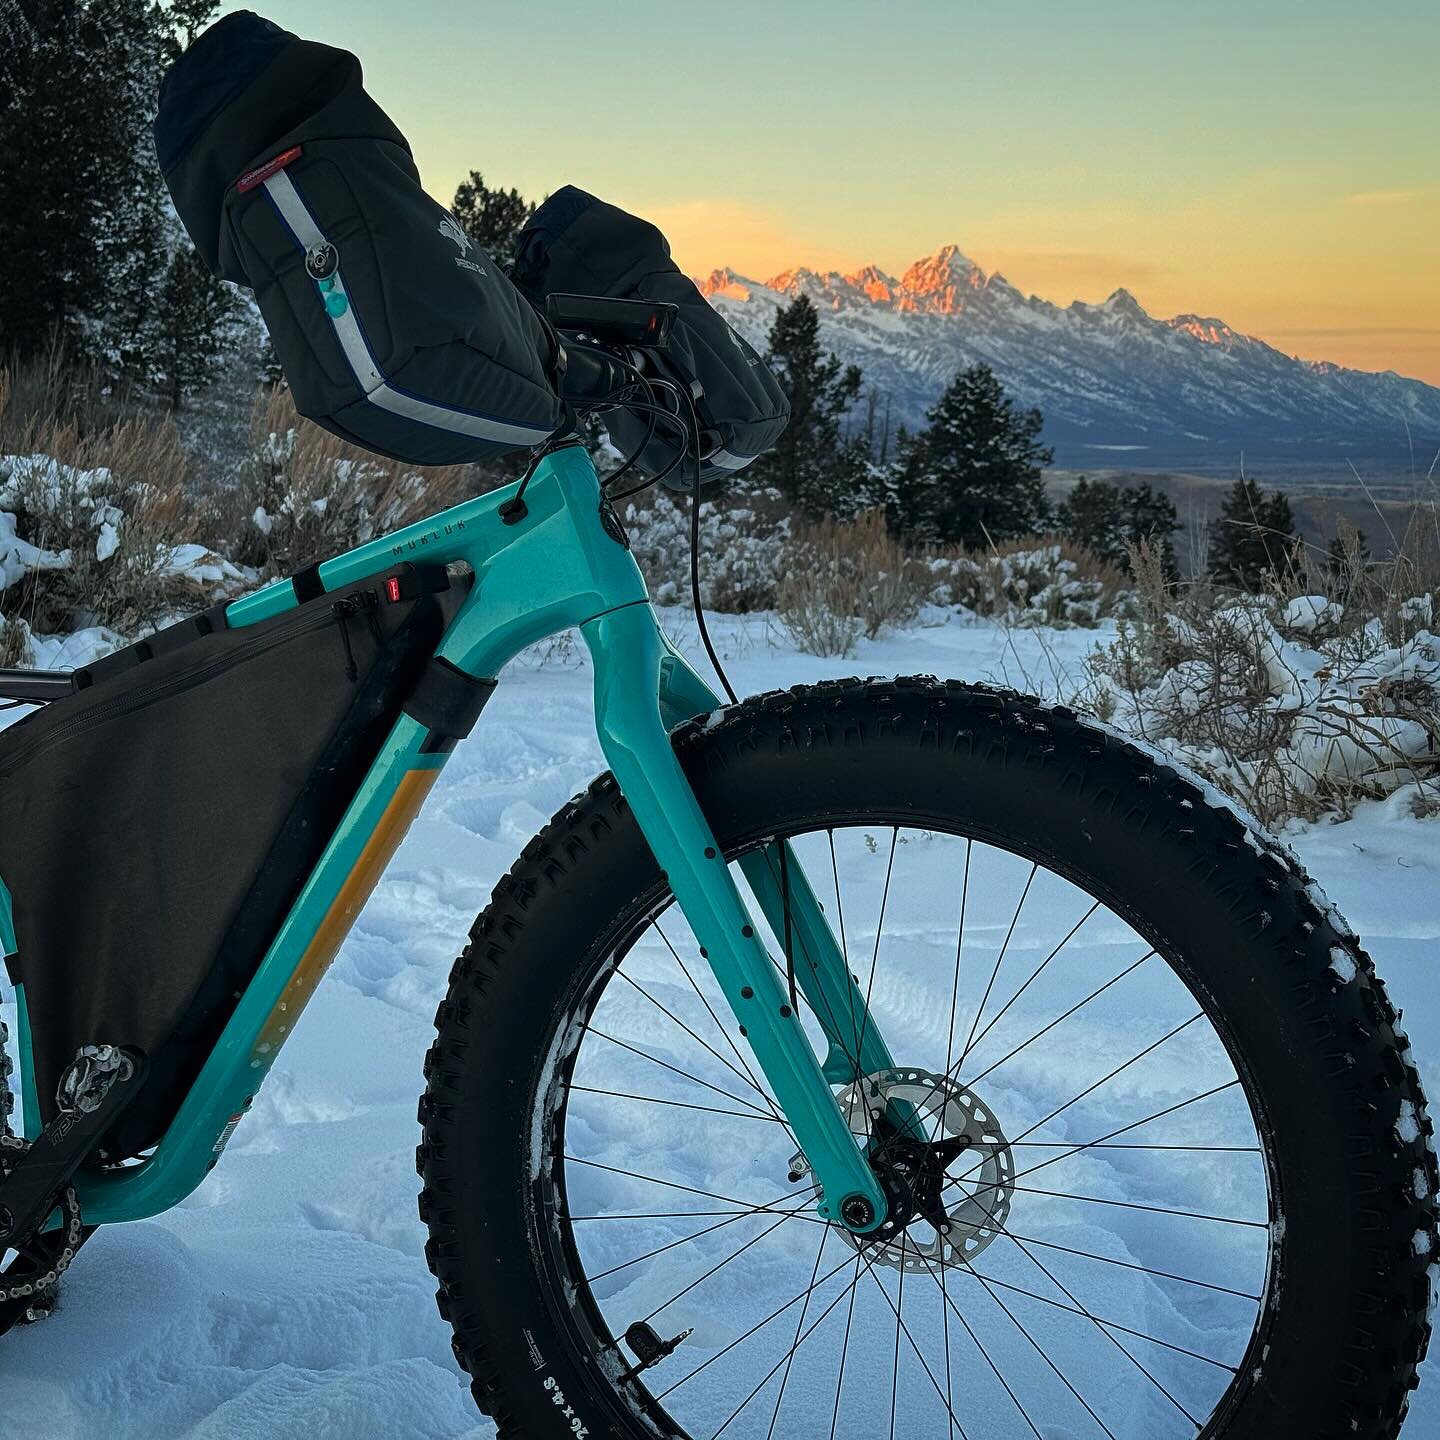 Spectacular sunset in Cache Creek last night. Join @ryanpaulkurtz for a group fat bike ride this Saturday Dec 2nd. Starting from the Cache Creek Trailhead at noon and finishing at Stillwest. 

#fitzgeraldsbicycles #communitybikeshop #cycling #fatbike